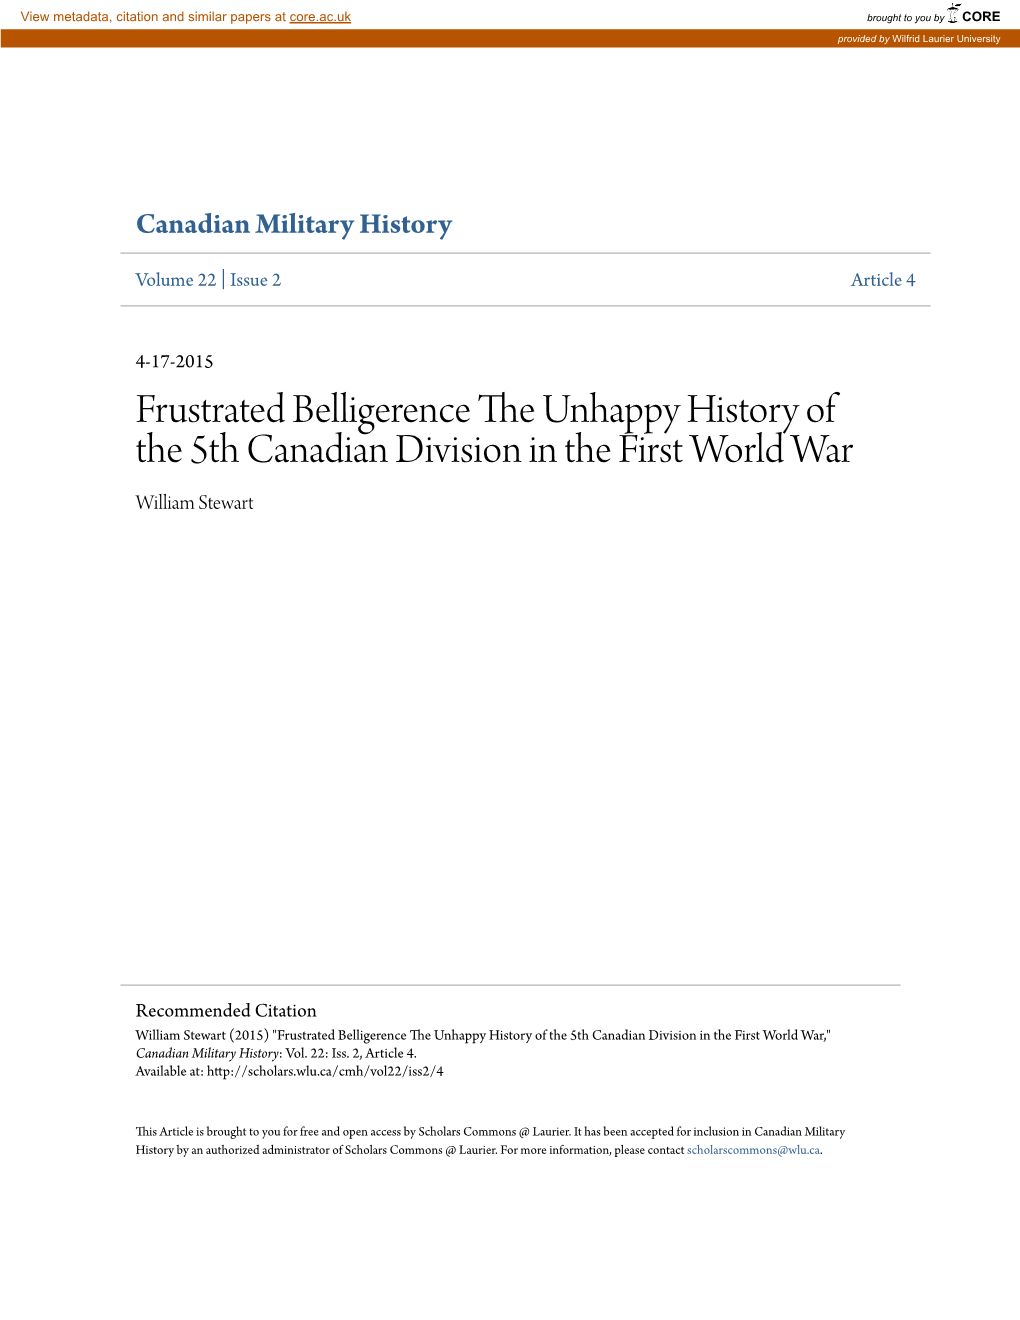 Frustrated Belligerence the Unhappy History of the 5Th